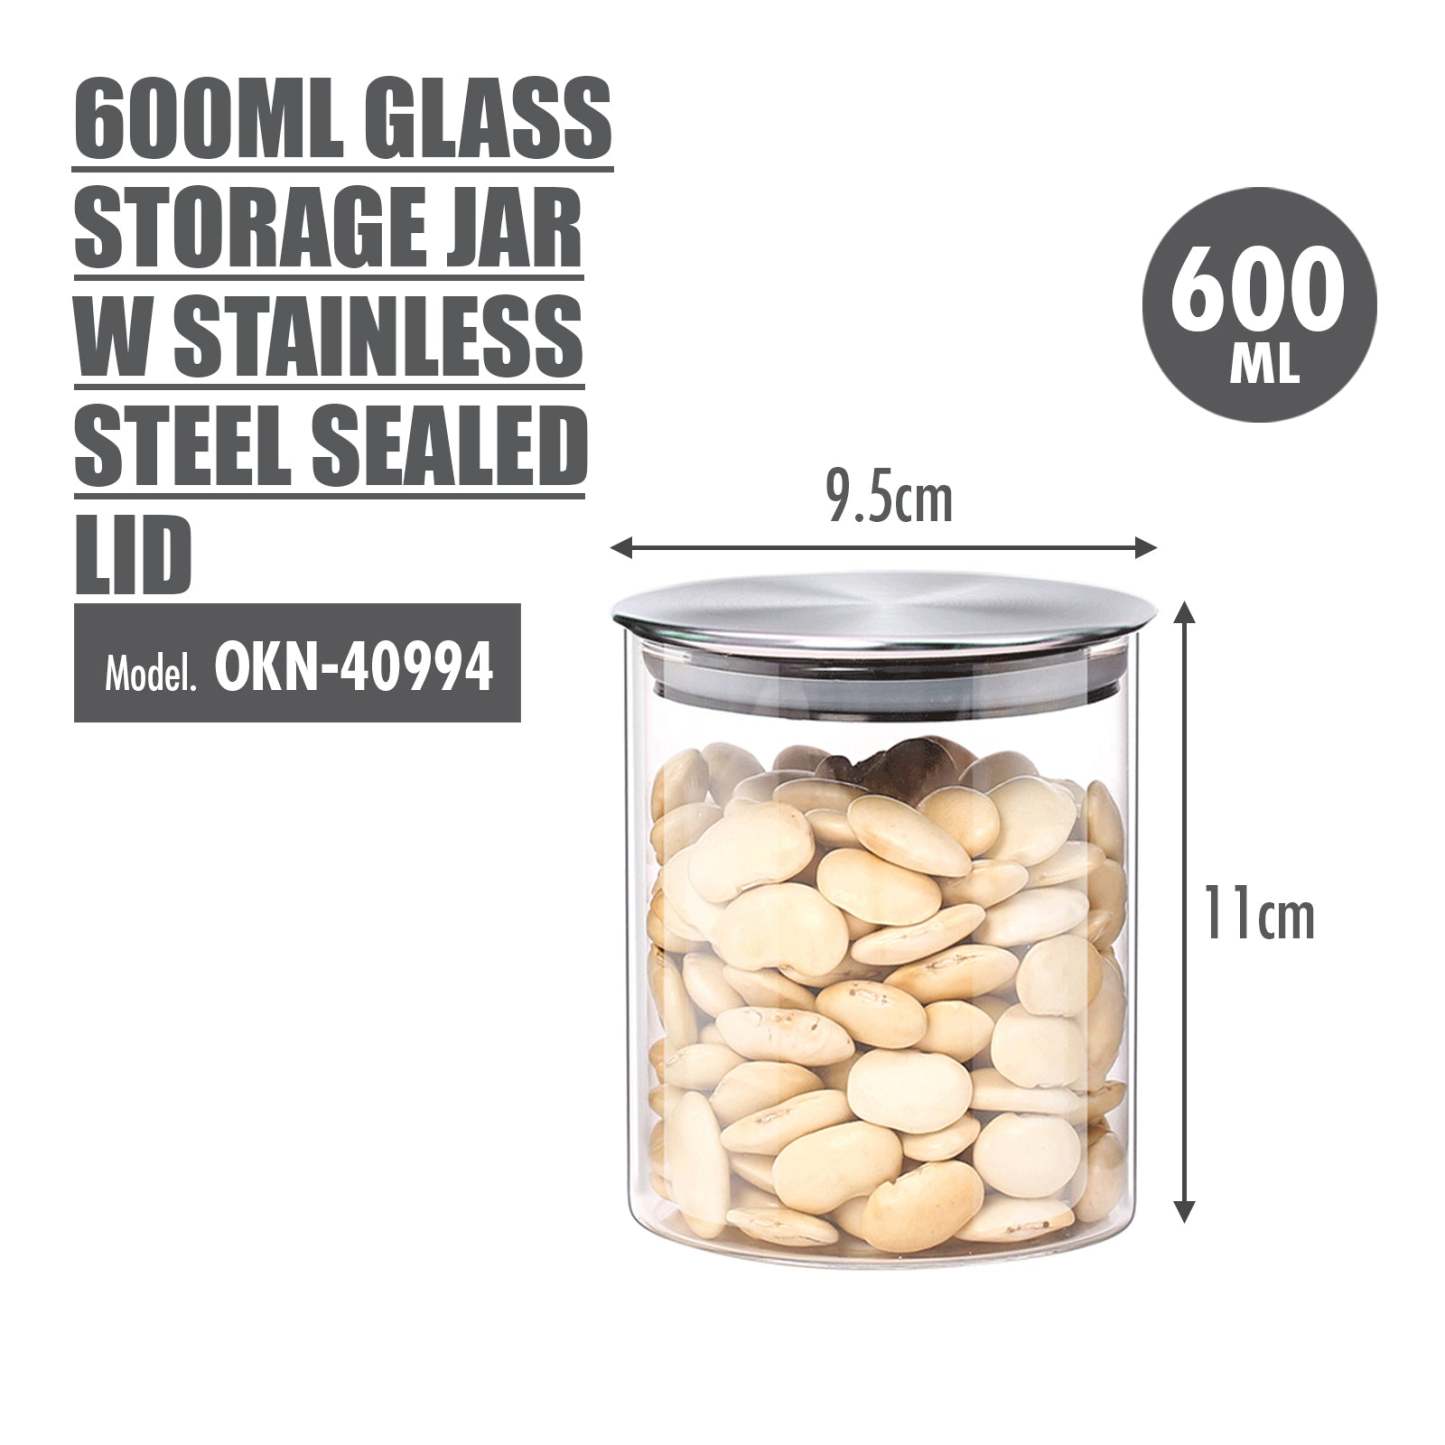 600ml Glass Storage Jar with Stainless Steel Sealed Lid (Dia: 9.5cm) - HOUZE - The Homeware Superstore